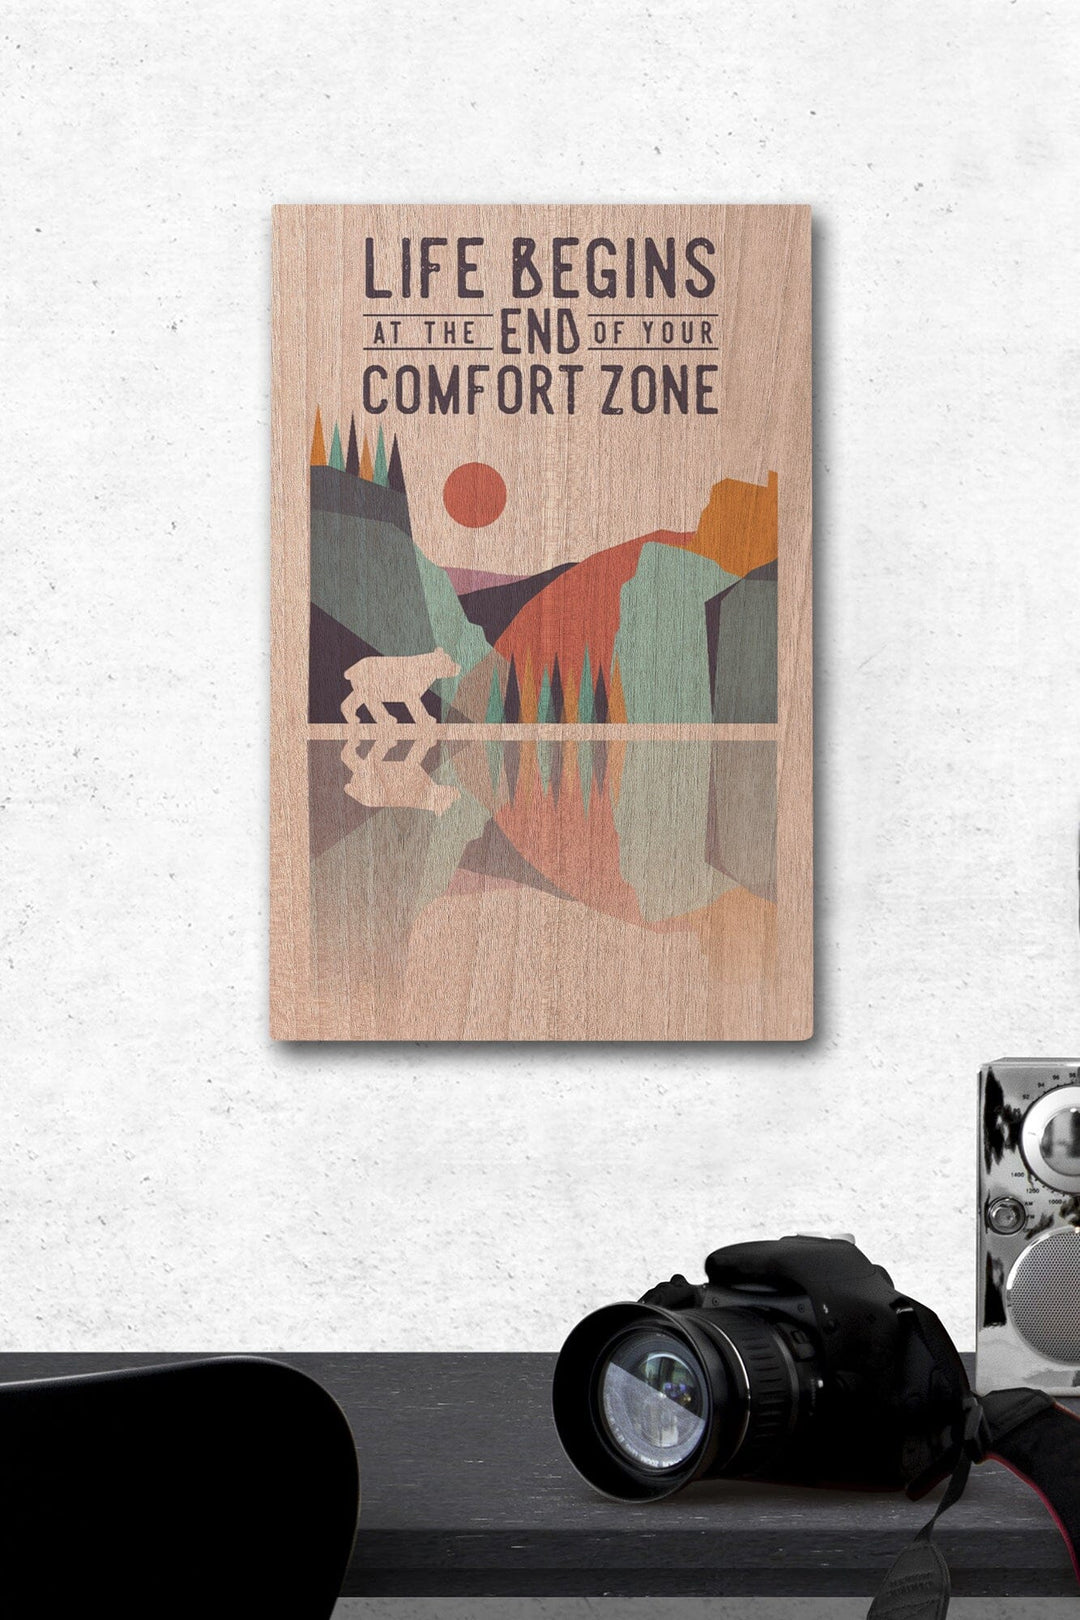 Wander More Collection, Life Begins at the End of Your Comfort Zone, Lantern Press Artwork, Wood Signs and Postcards Wood Lantern Press 12 x 18 Wood Gallery Print 